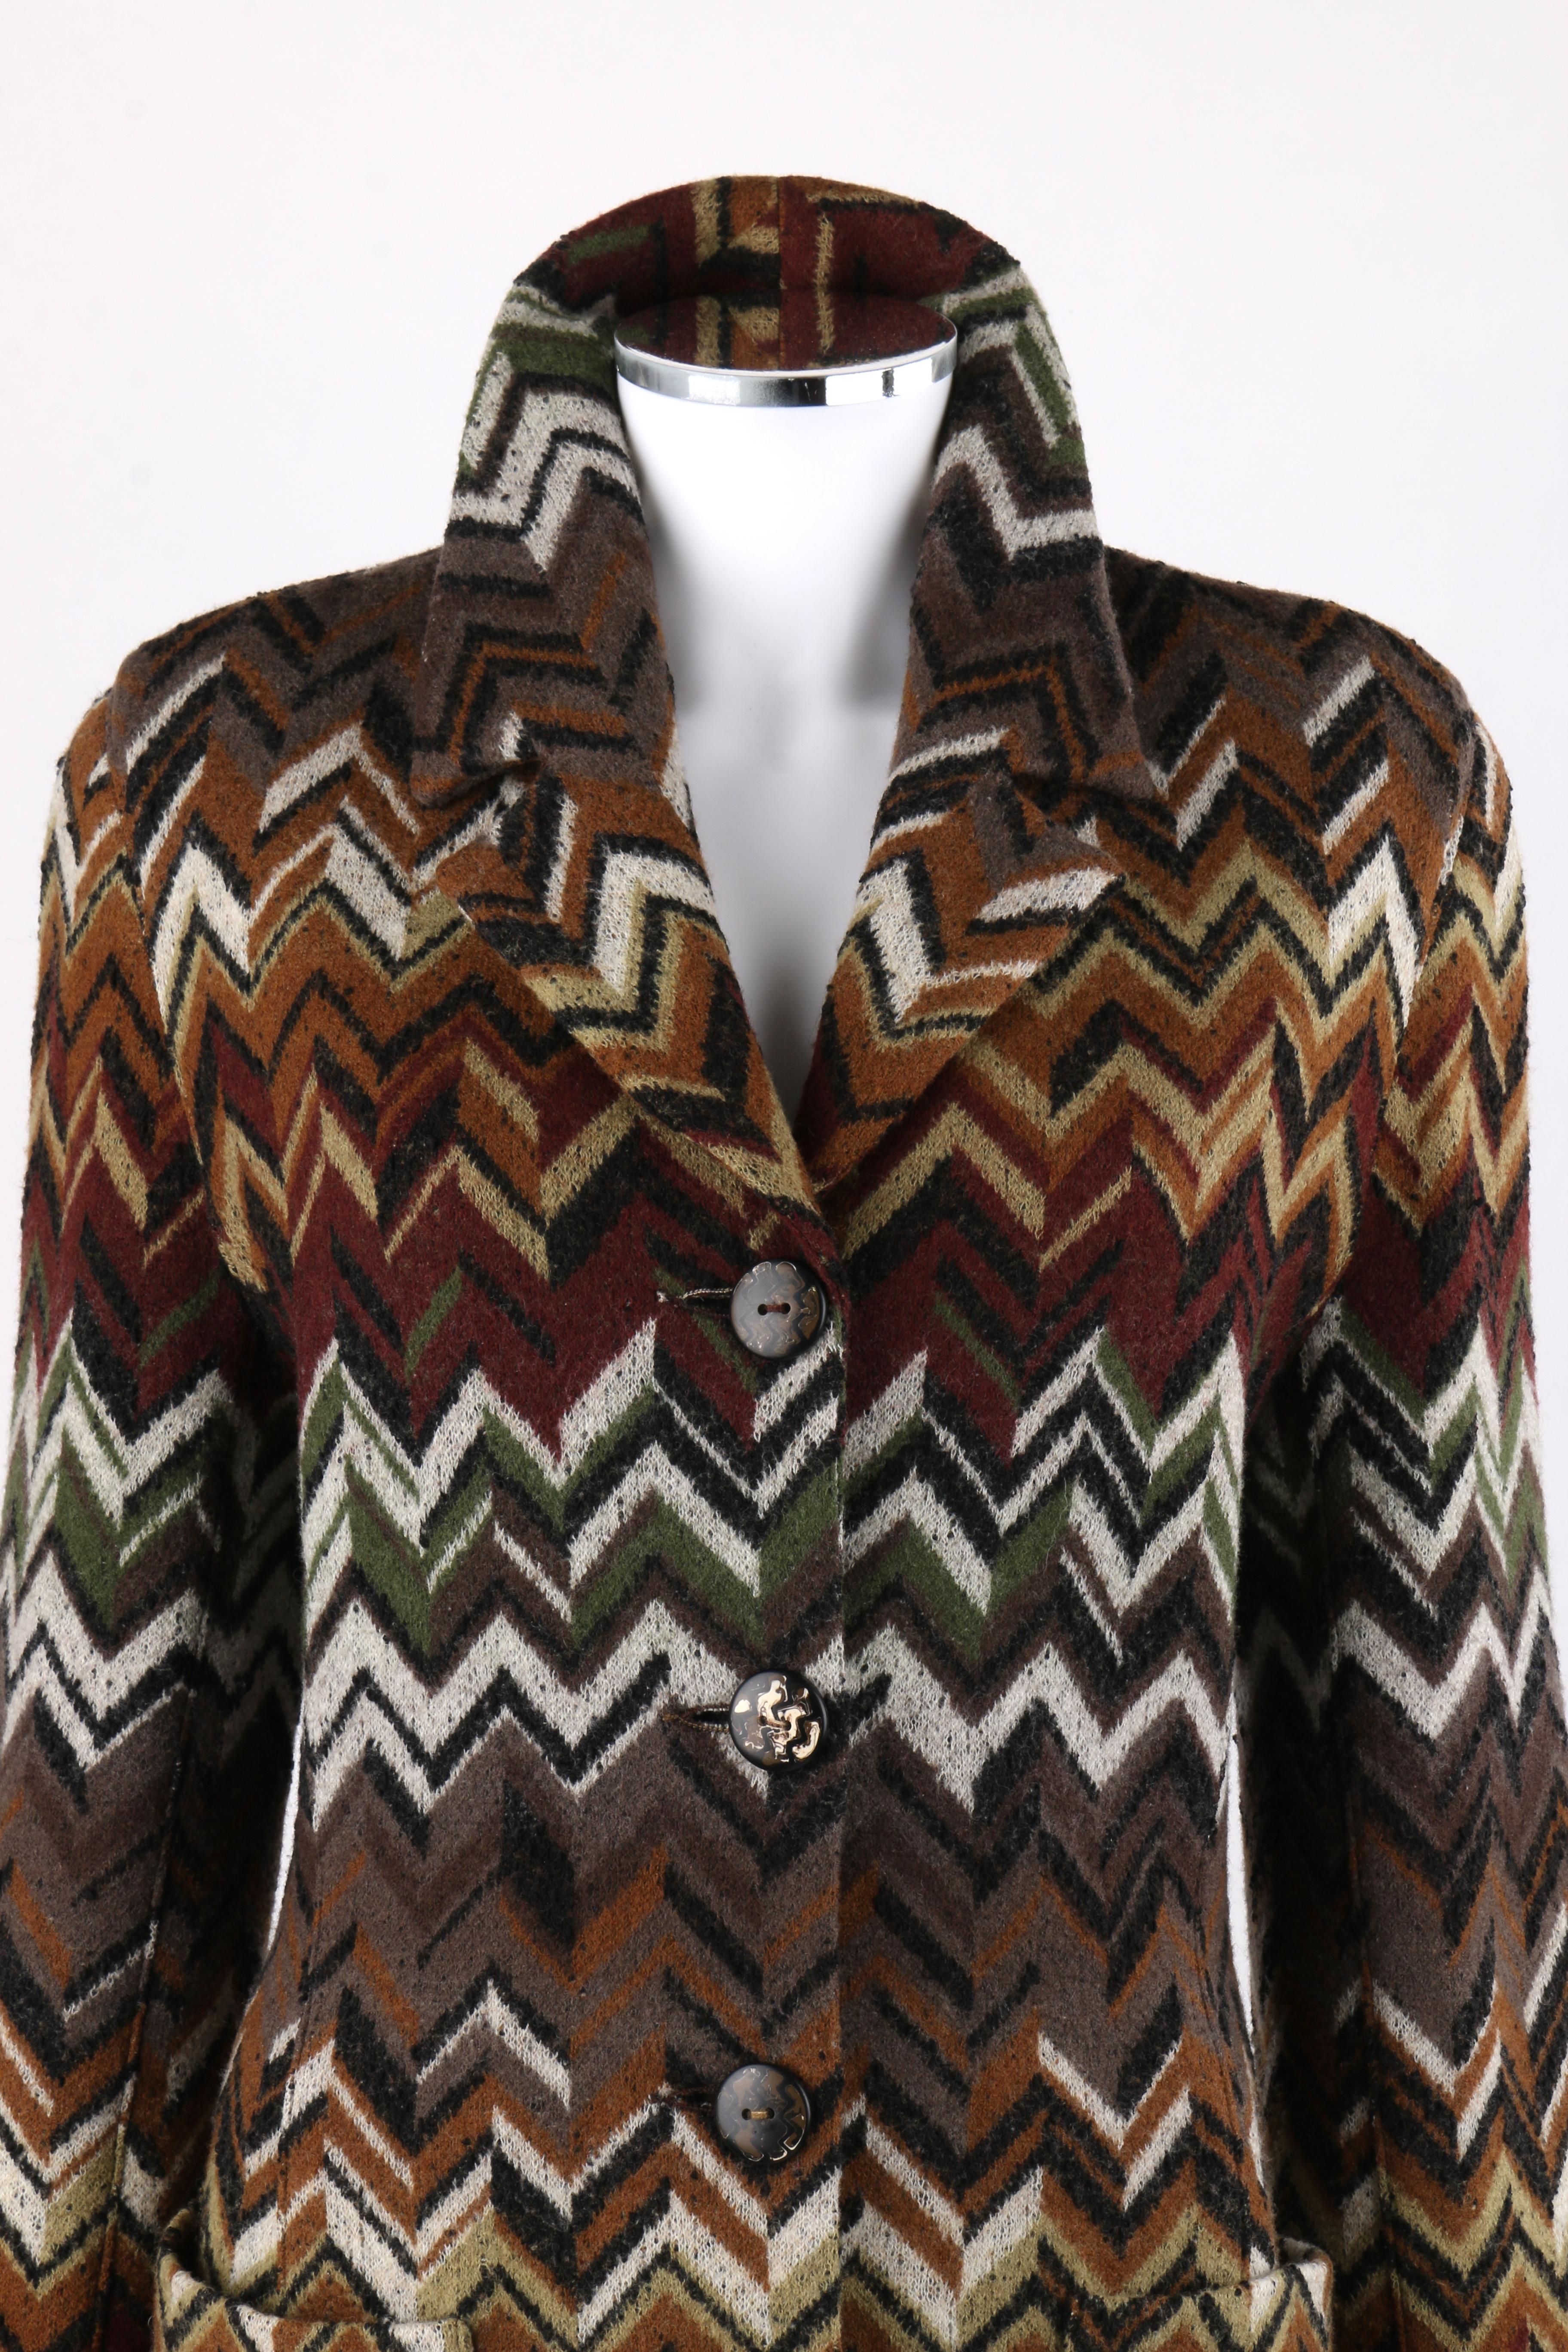 MISSONI c.1970’s Multi-color Chevron Button Up Wool Knit Coat Jacket 
 
Circa: 1970’s 
Label(s): Missoni / Neiman Marcus   
Style: Coat
Color(s): Shades of green, brown, red, yellow, grey and black.  
Lined: No
Unmarked Fabric Content: